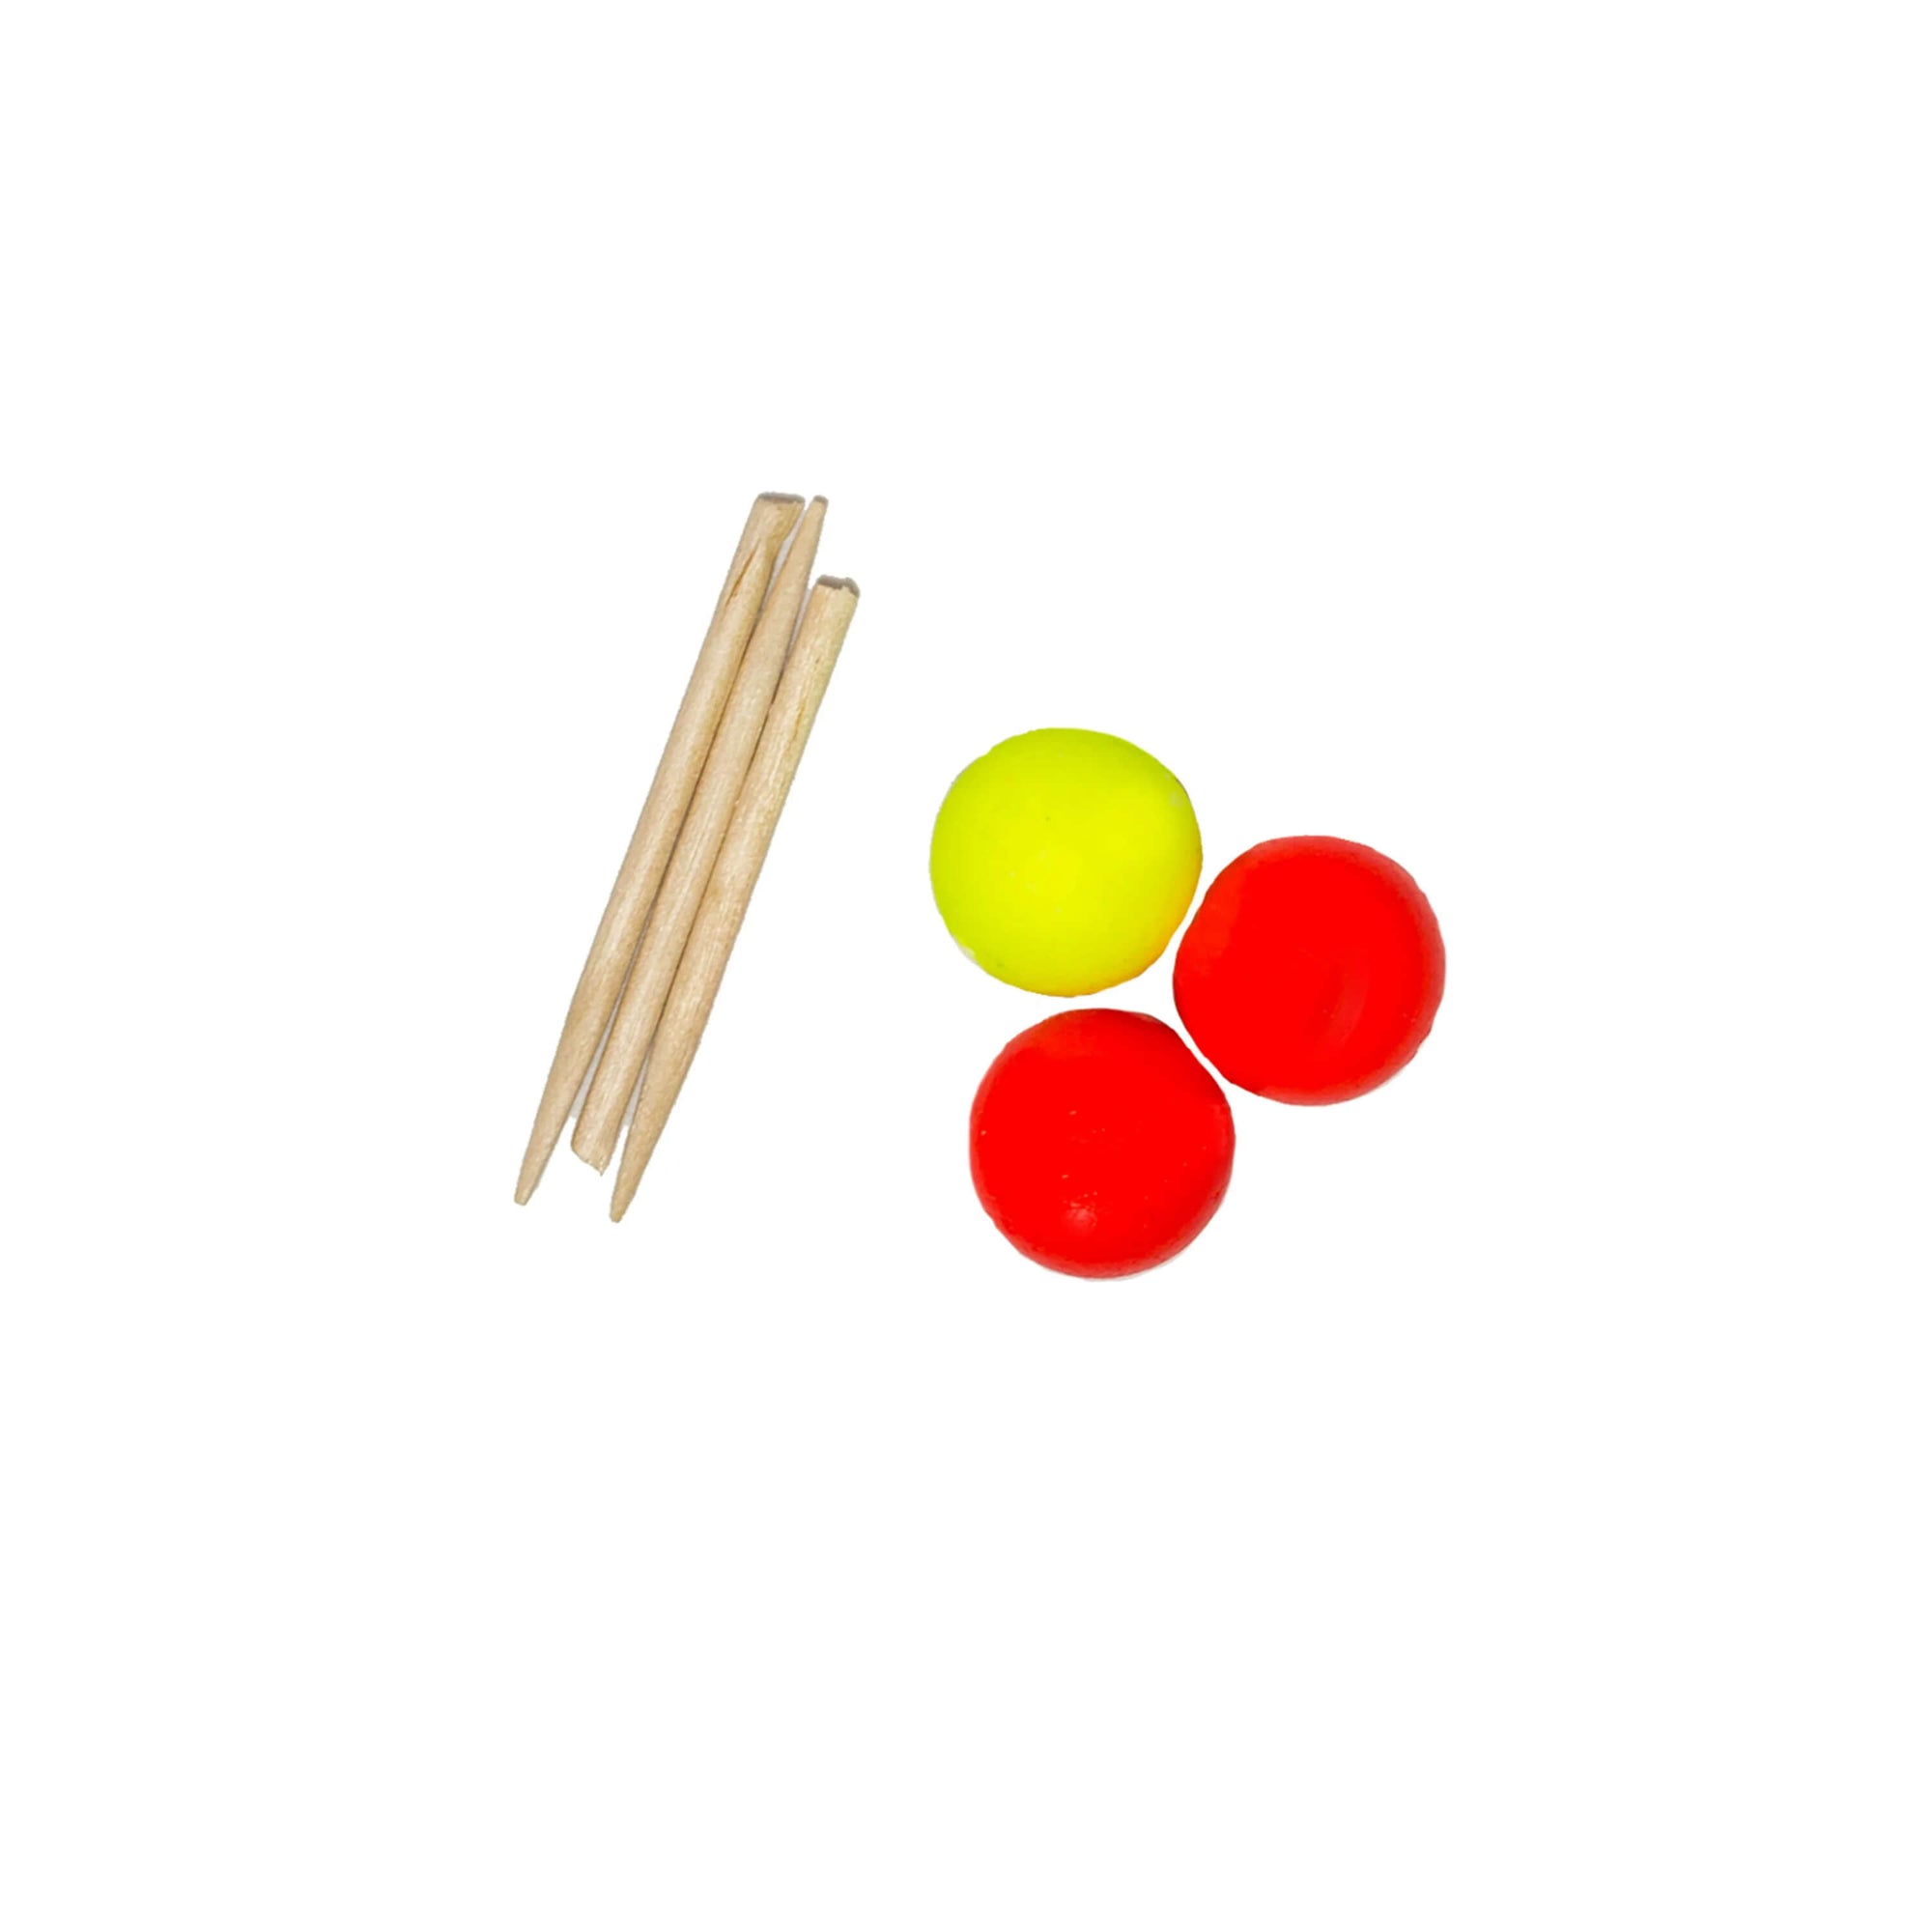 Strike 3 pack. One strike is yellow, two are red, and toothpicks.